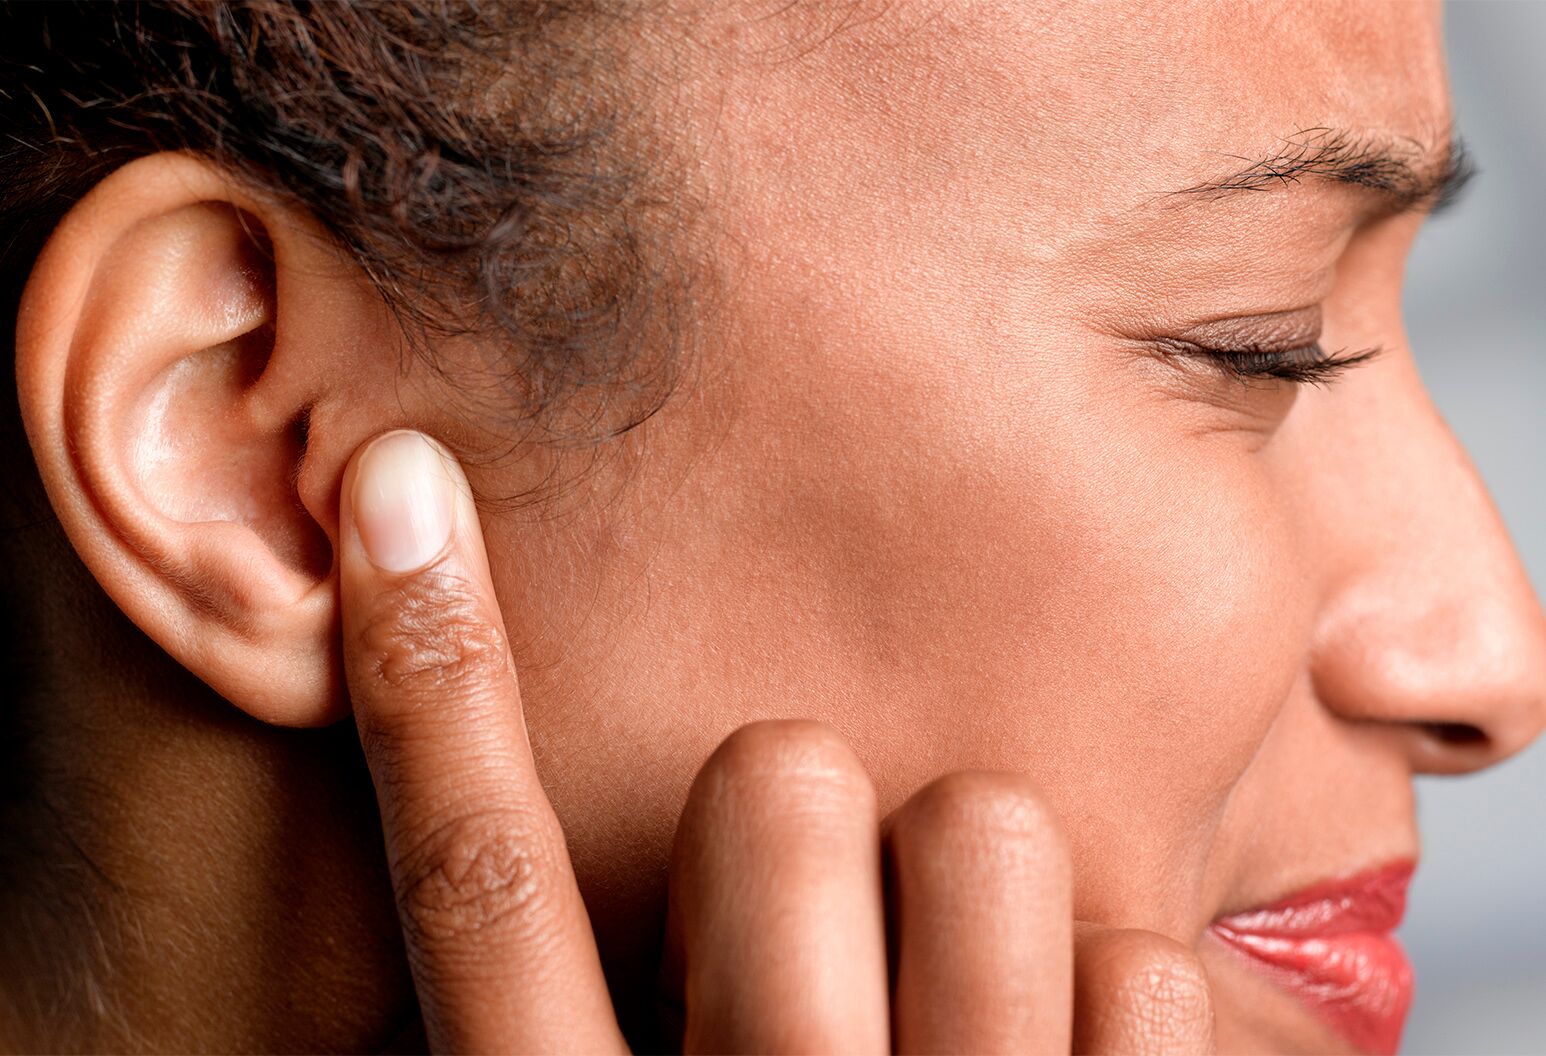 How to clean your ears: Safety and tips